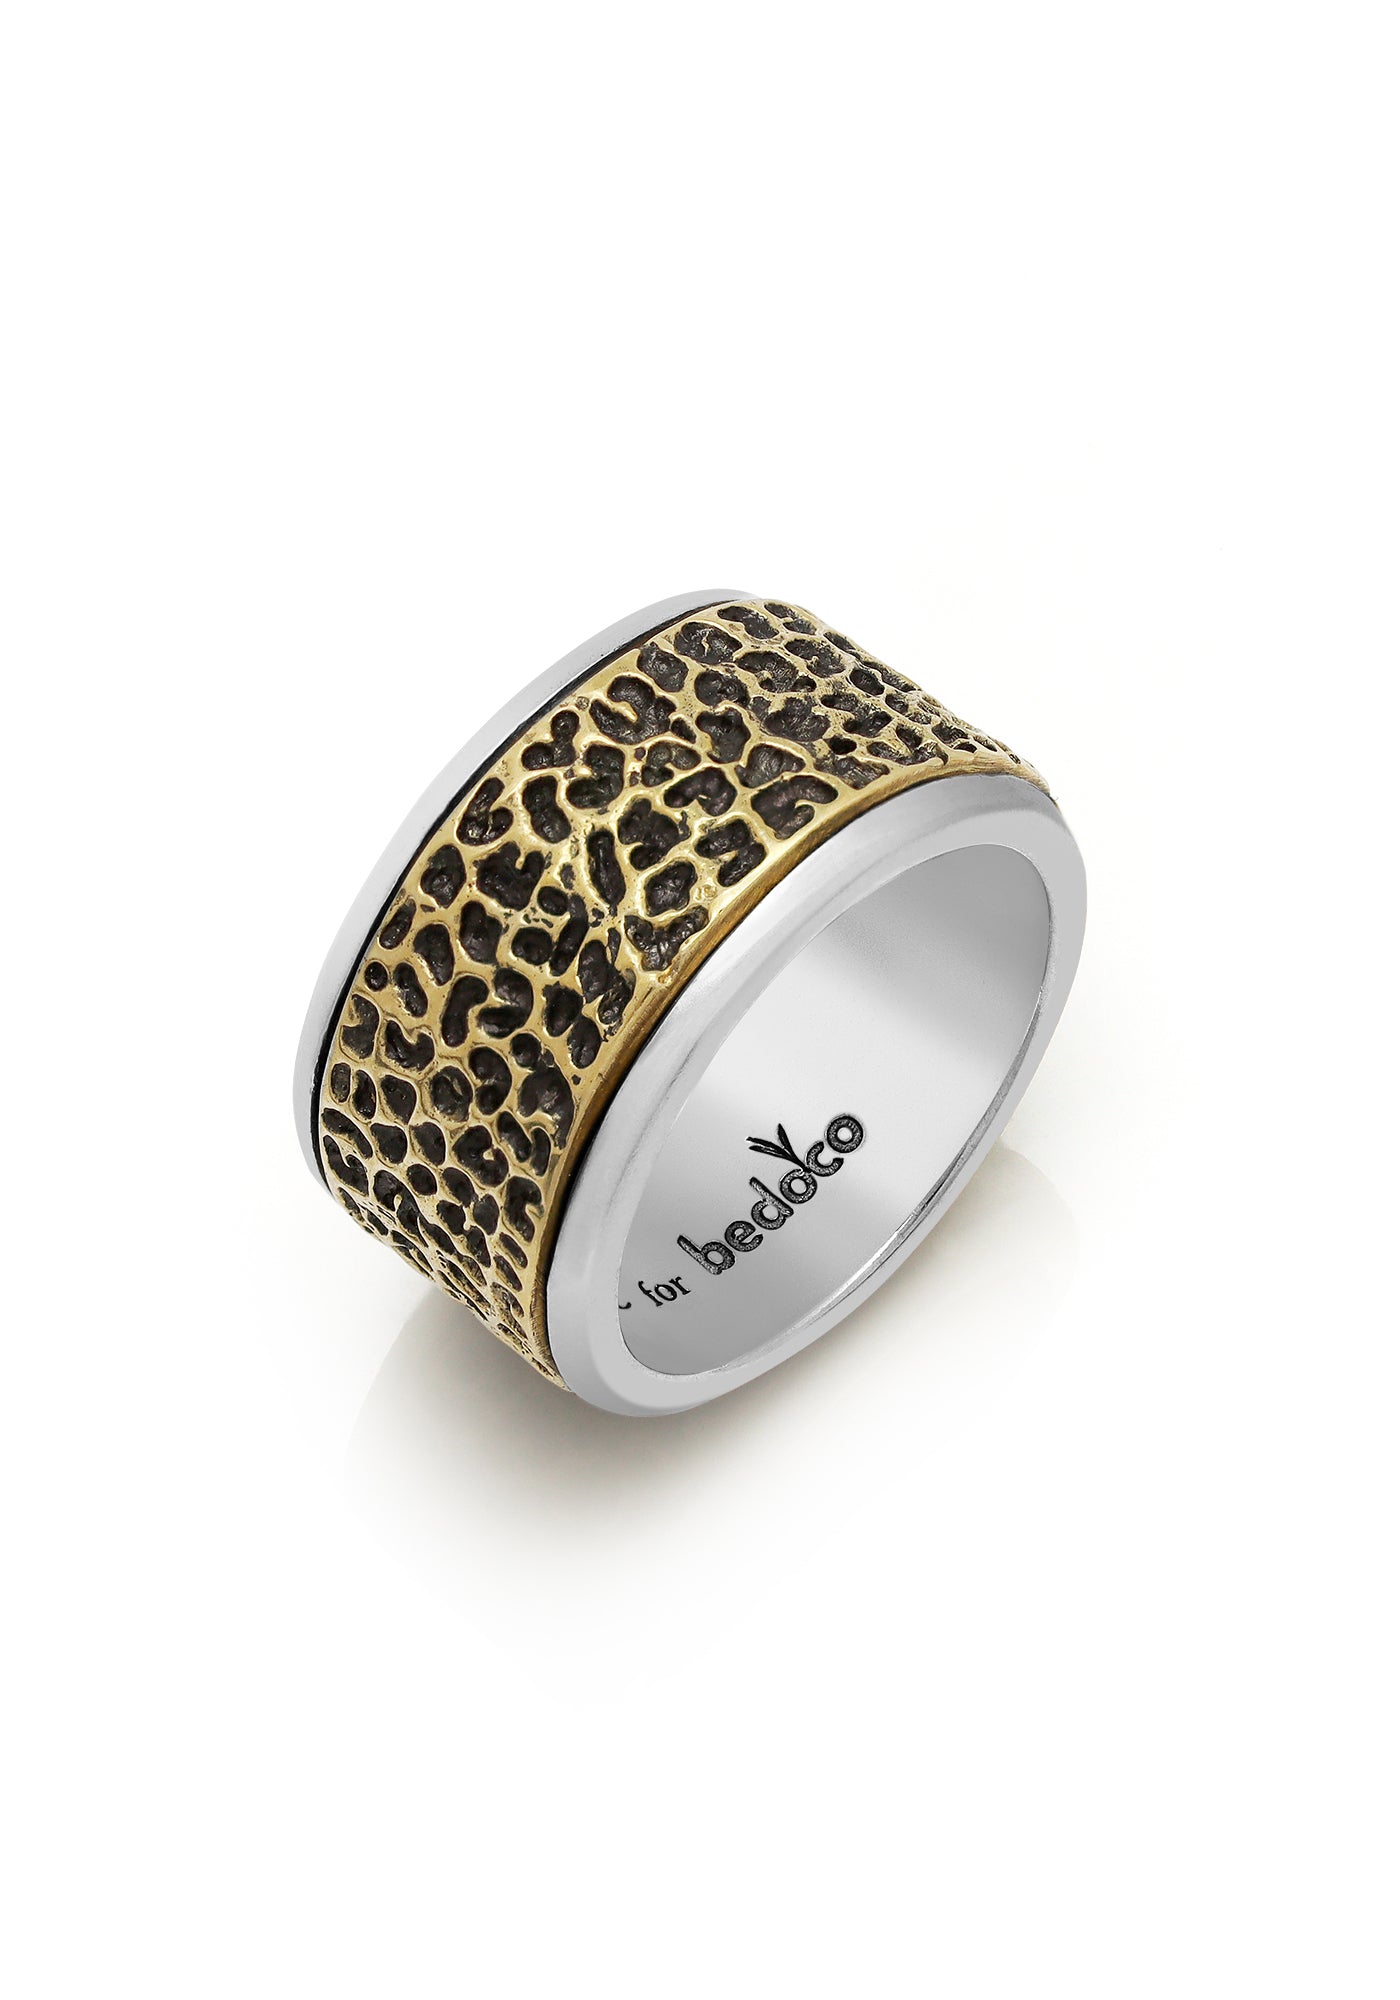 Leopard Spin Ring - W